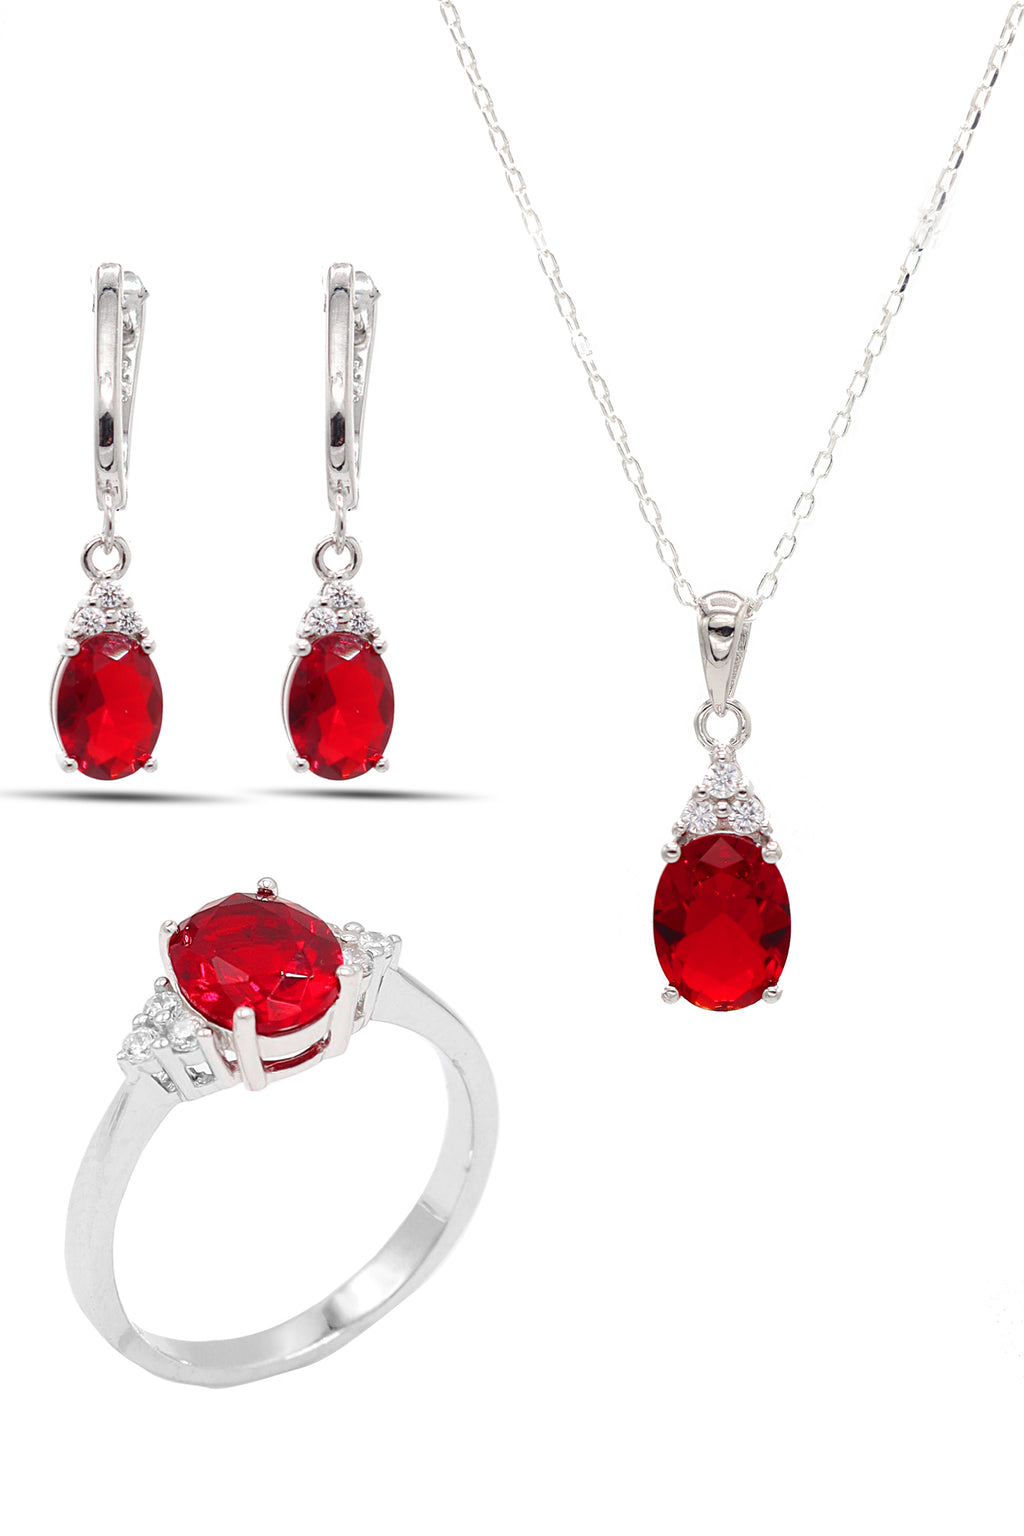 Oval Model Silver Triple Jewelry Set With Ruby (NG201021912)